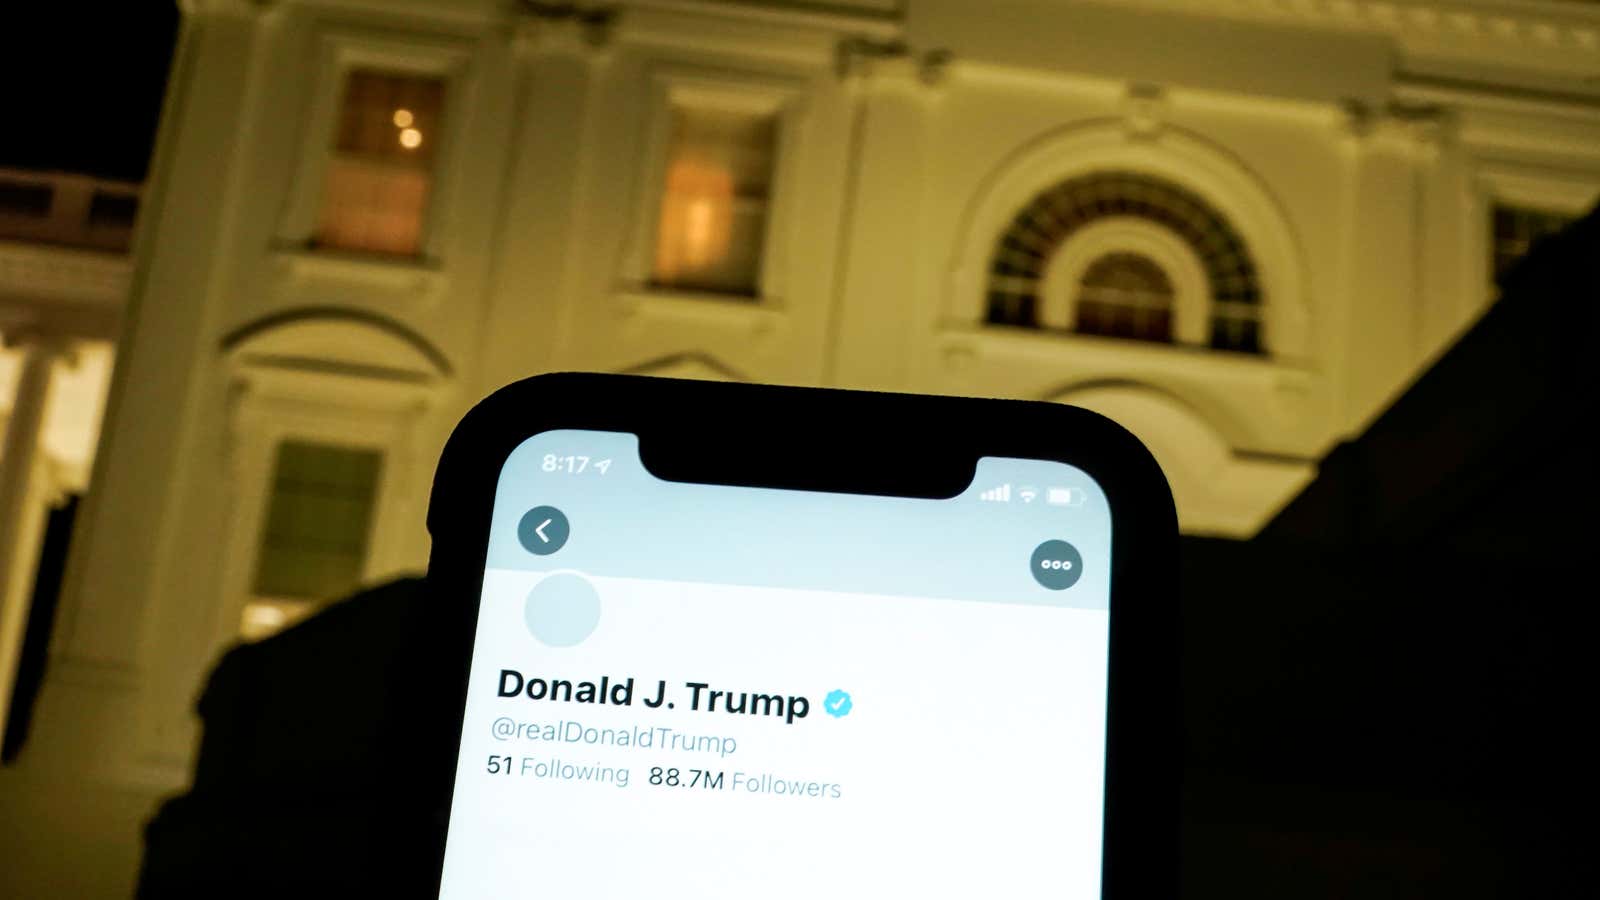 On Jan. 8, 2021 Twitter permanently suspended Donald Trump from its service.